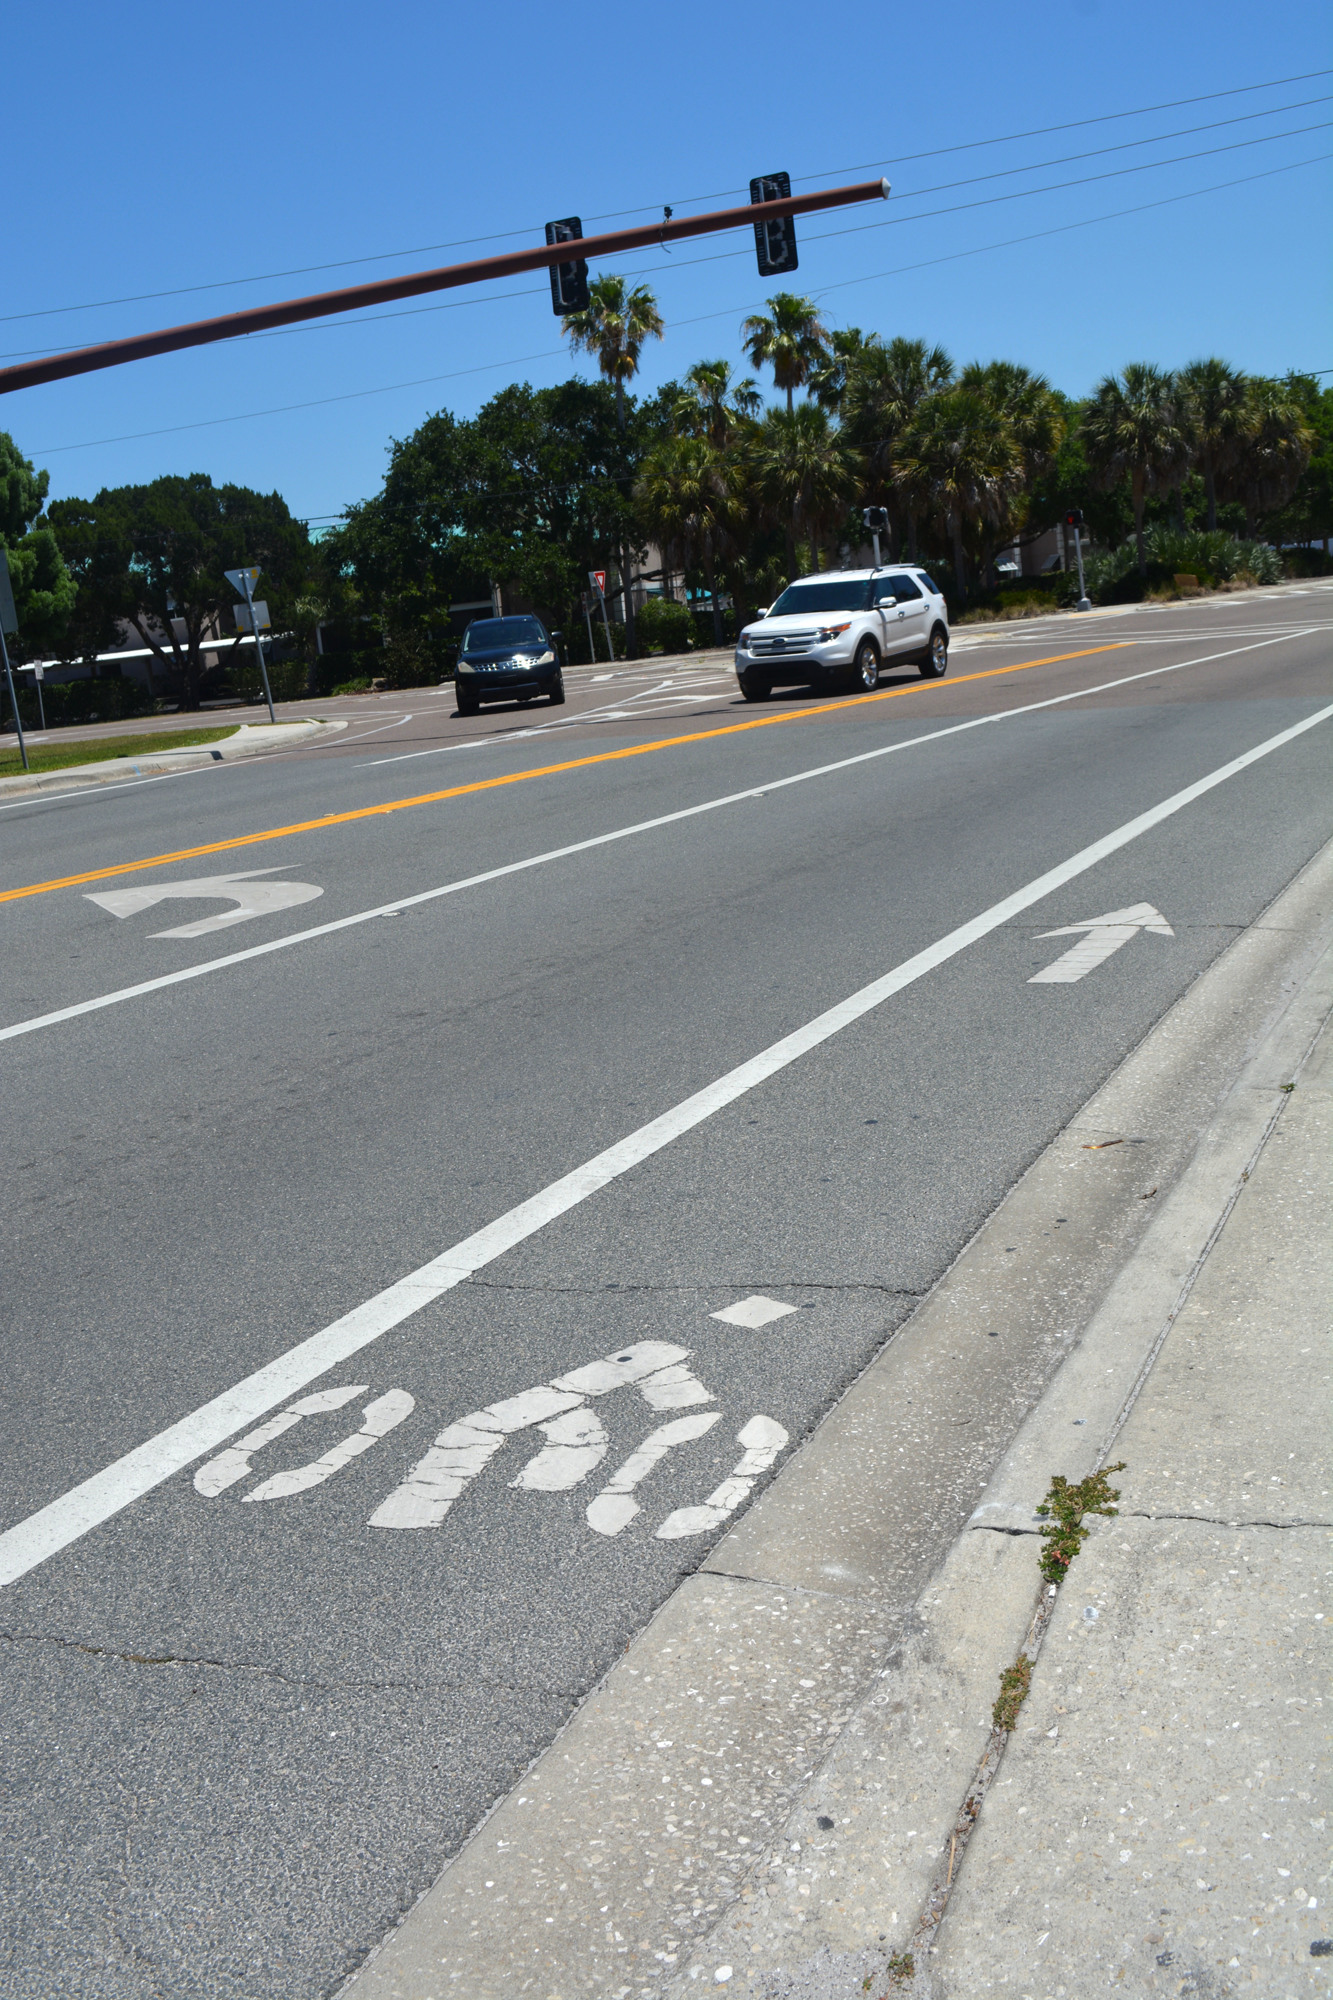 According to AASTHO, bike lanes should be painted with the image of a cyclist and an arrow that points in the proper direction. The bike lanes on Midnight Pass largely lack such paint. This one can be seen on Beach Road.